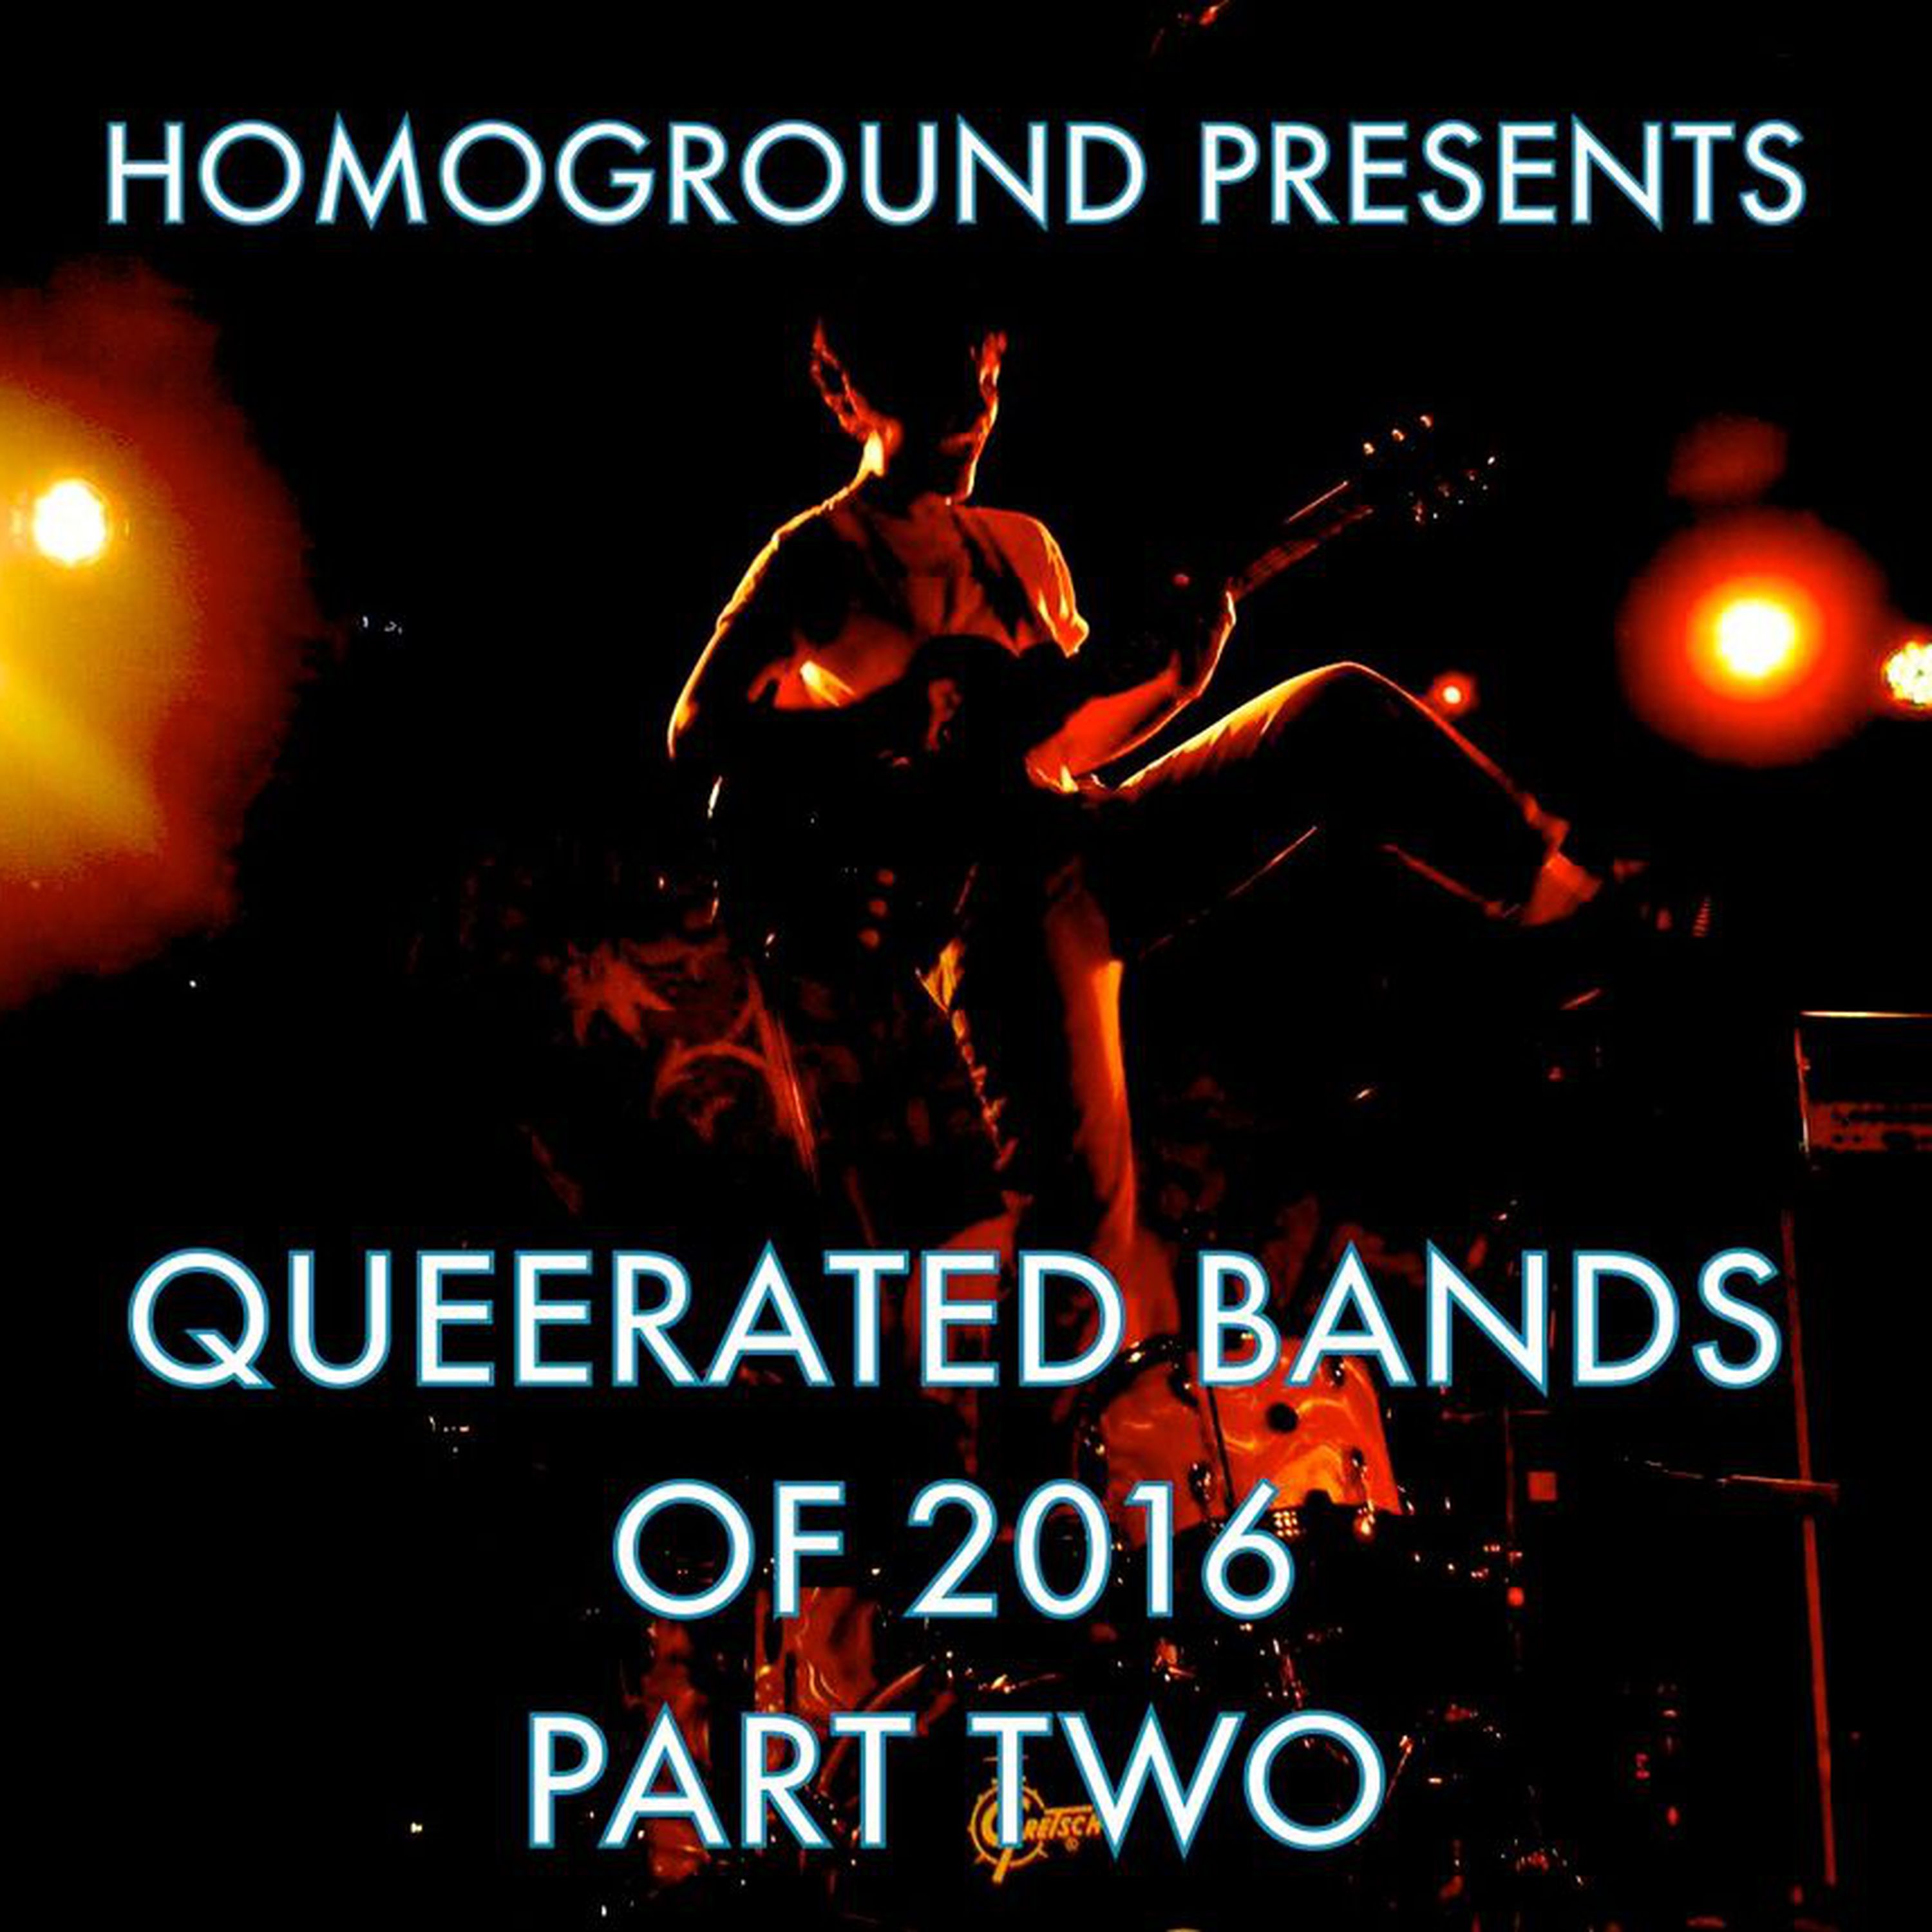 QUEERATED BANDS OF 2016 // PART TWO